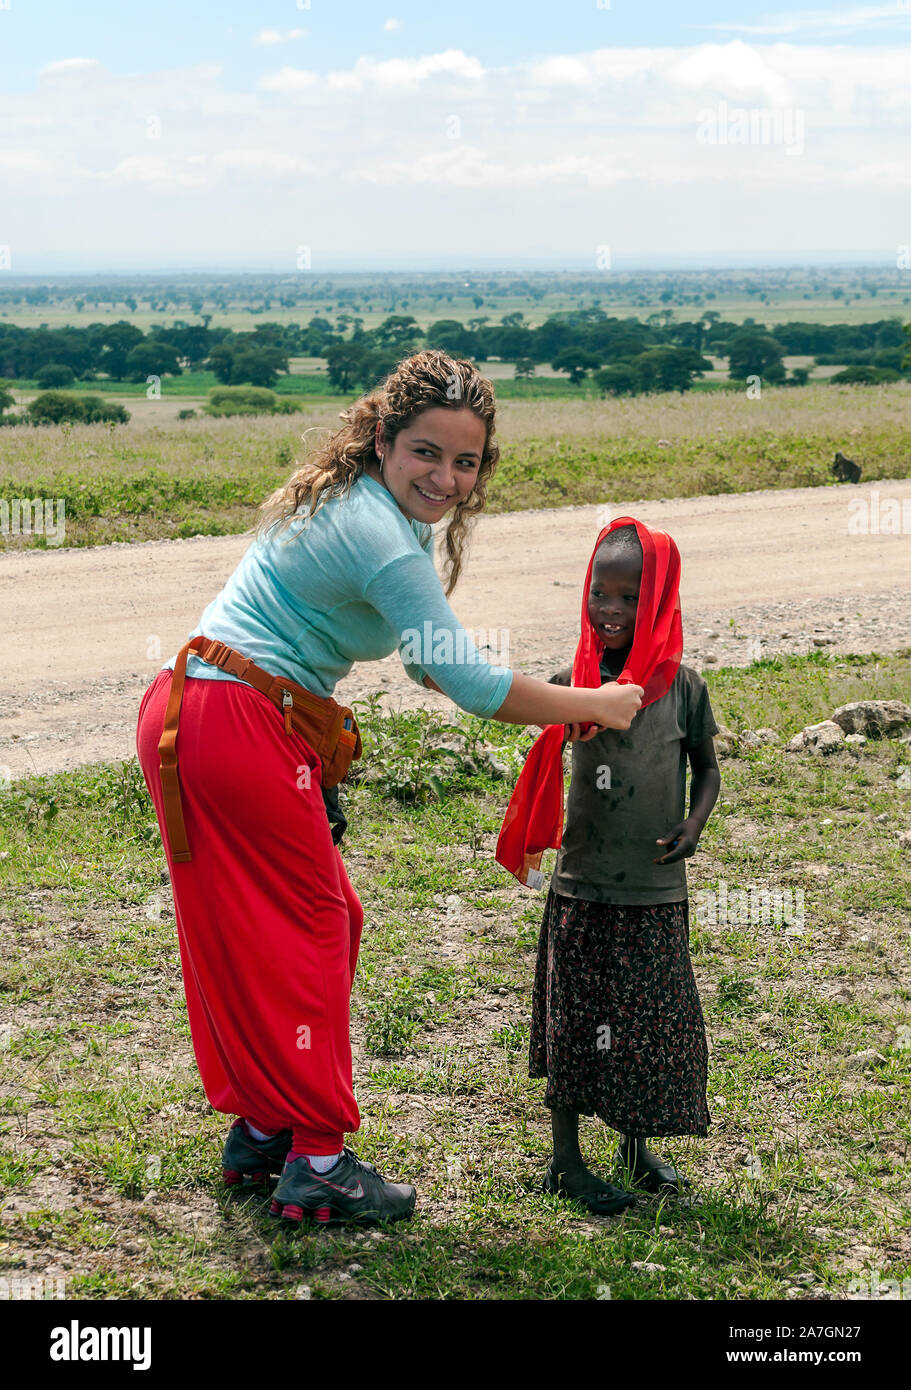 MTO WA MBU, TANZANIA - MAY 2014: Little unidentified Tanzanian children f dressed with simple and dirty clothes with european tourist in MTO WA MBU Stock Photo